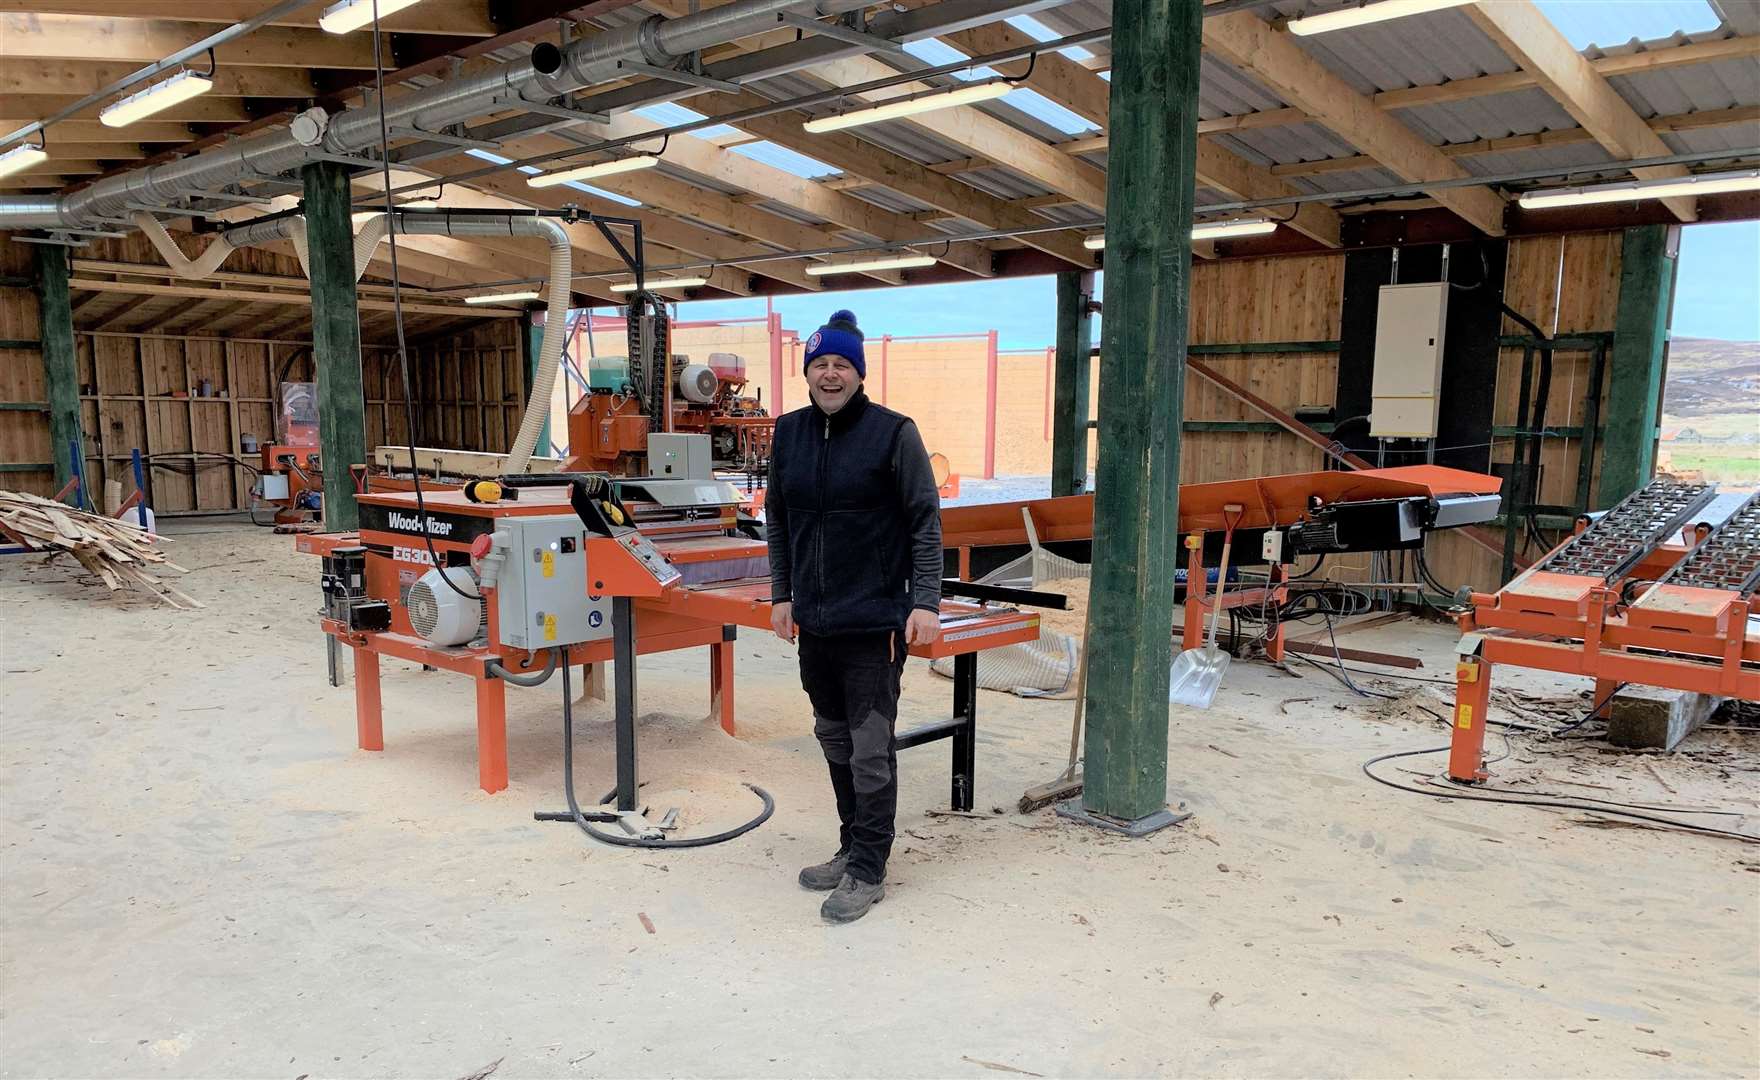 Sawmill owner Malcolm Morrison has brought in expert advice to ensure the saegy of his workforce.